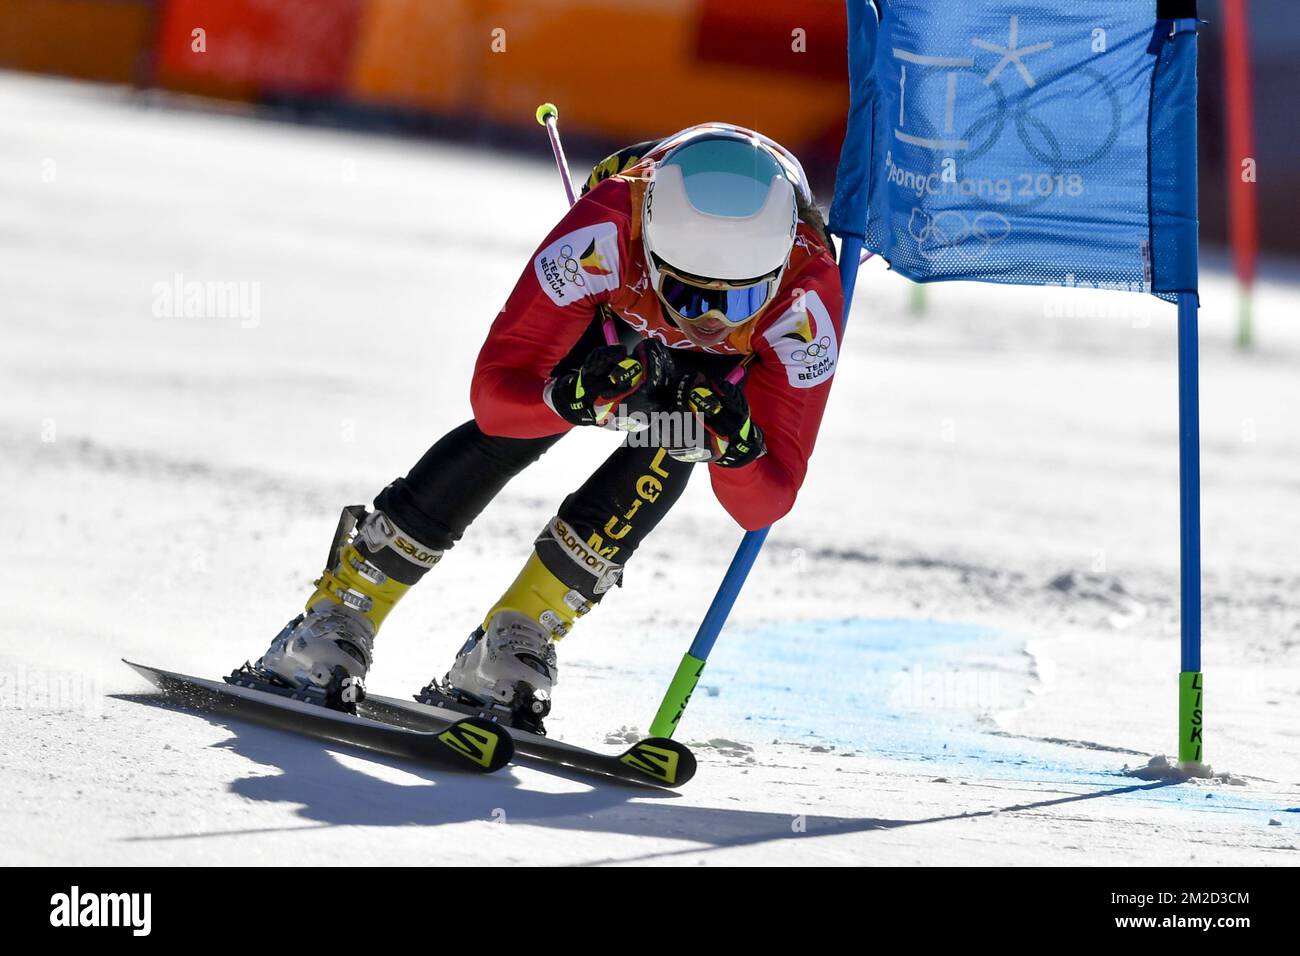 Belgian skier Kim Vanreusel pictured during the women's giant slalom skiing event, at the XXIII Olympic Winter Games, Thursday 15 February 2018, in Pyeongchang, South Korea. The Winter Olympics are taking place from 9 February to 25 February in Pyeongchang County, South Korea. BELGA PHOTO DIRK WAEM Stock Photo